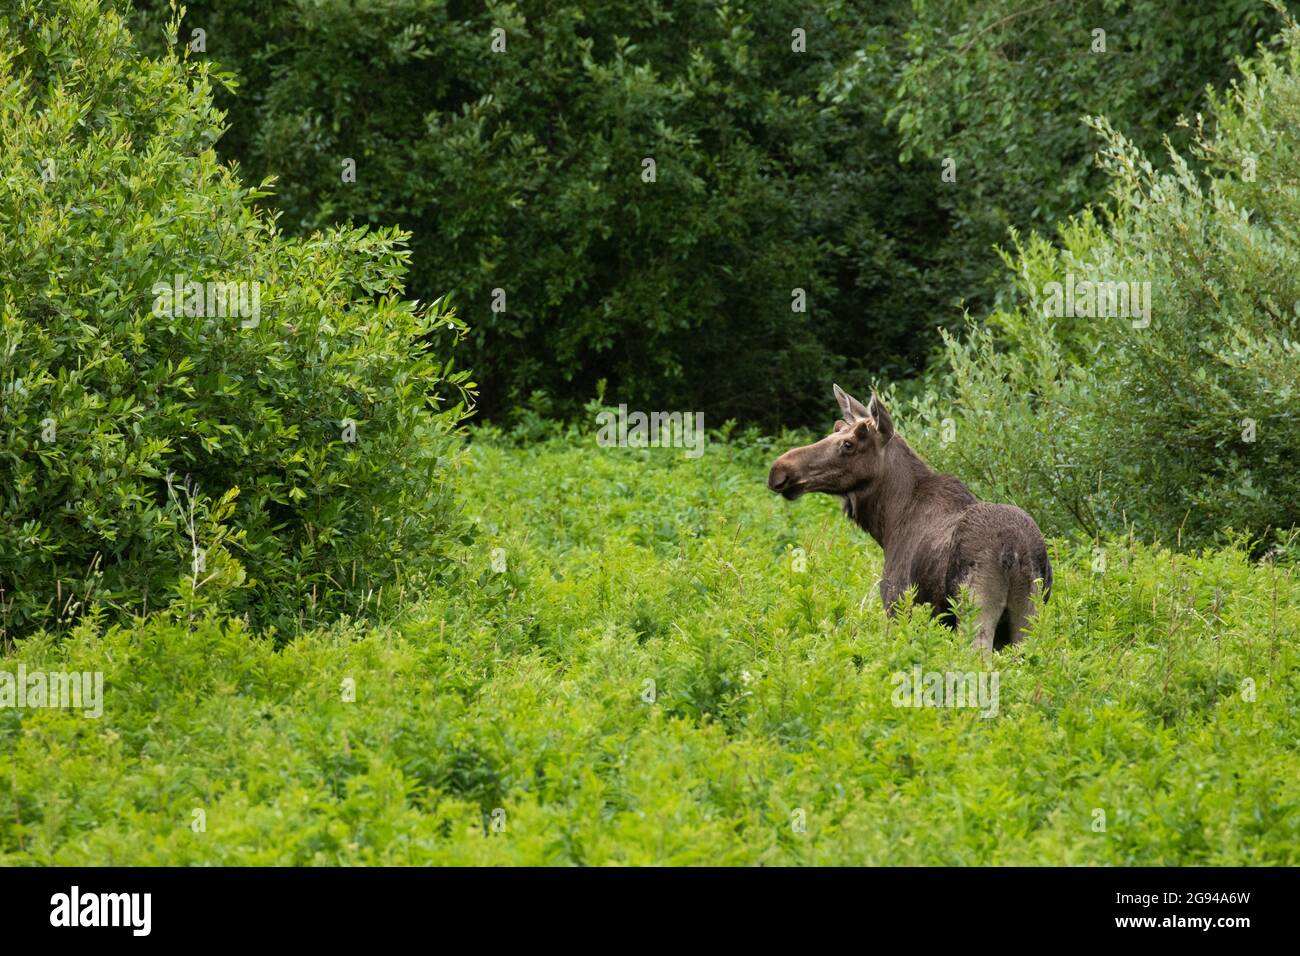 A large European mammal Elk, Alces alces in the middle of lush flooded meadow bushes during summertime in Estonia. Stock Photo